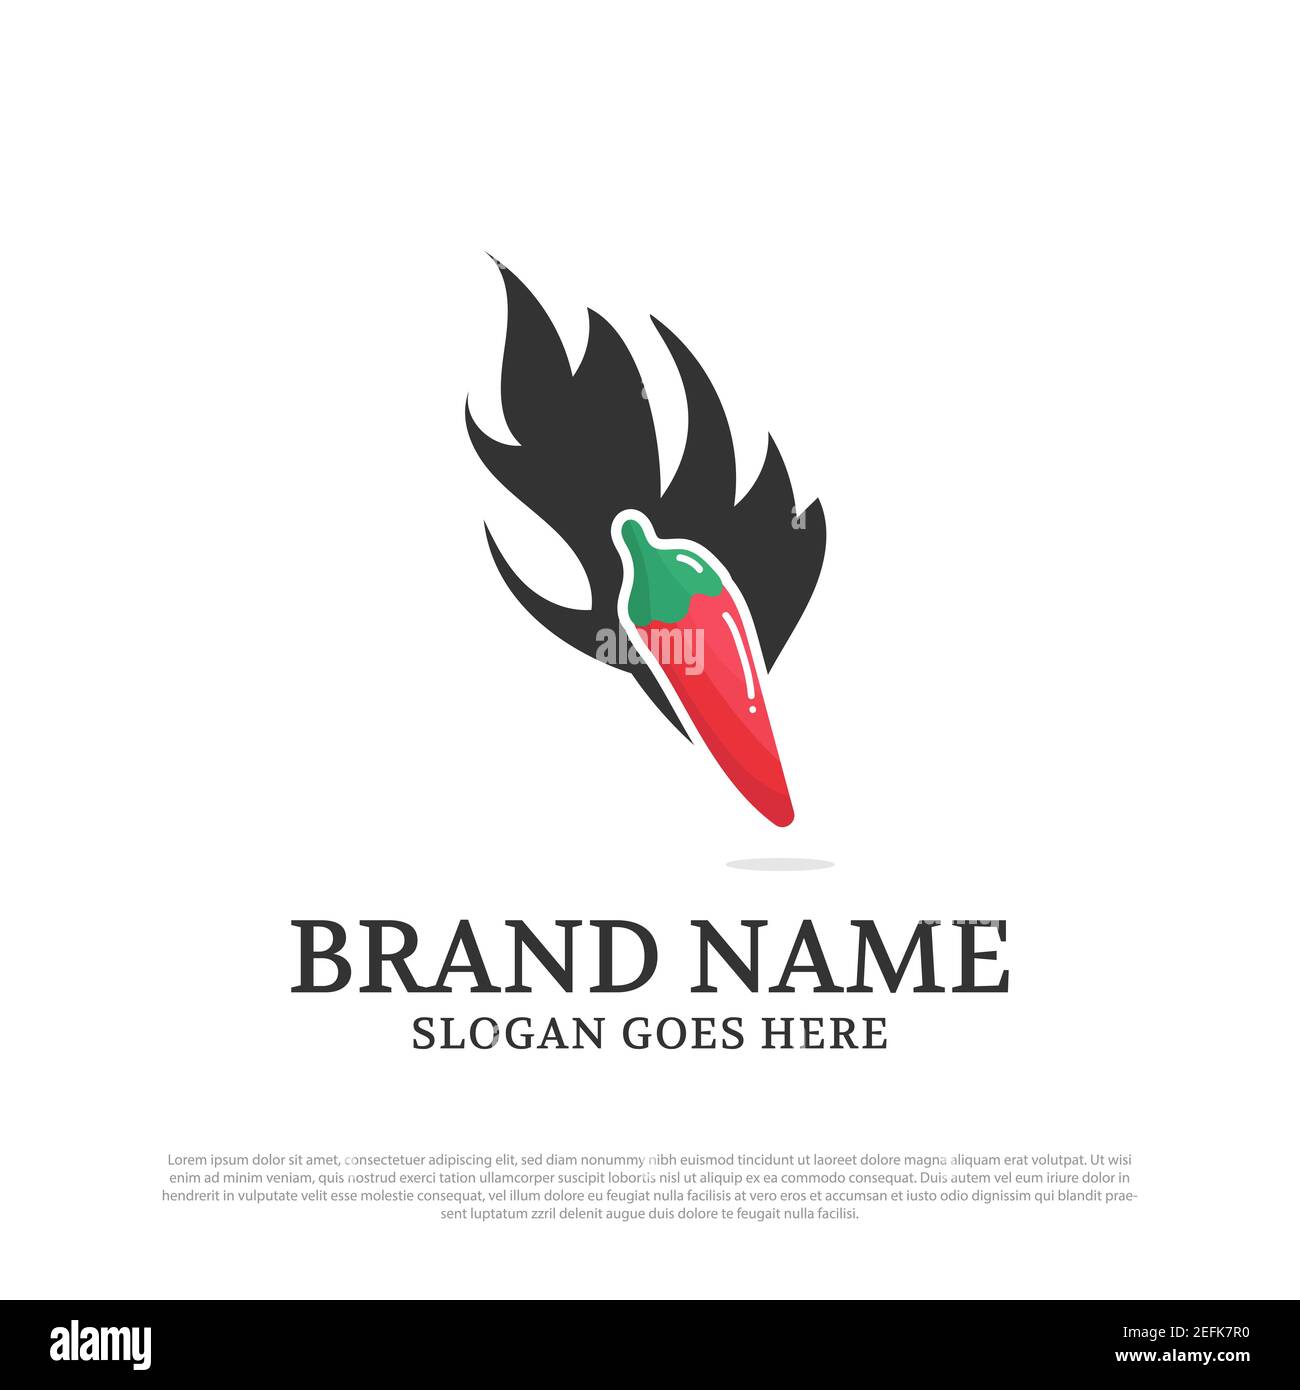 Chili and black flame logo designs inspirations,best for spicy food logo brand template Stock Vector